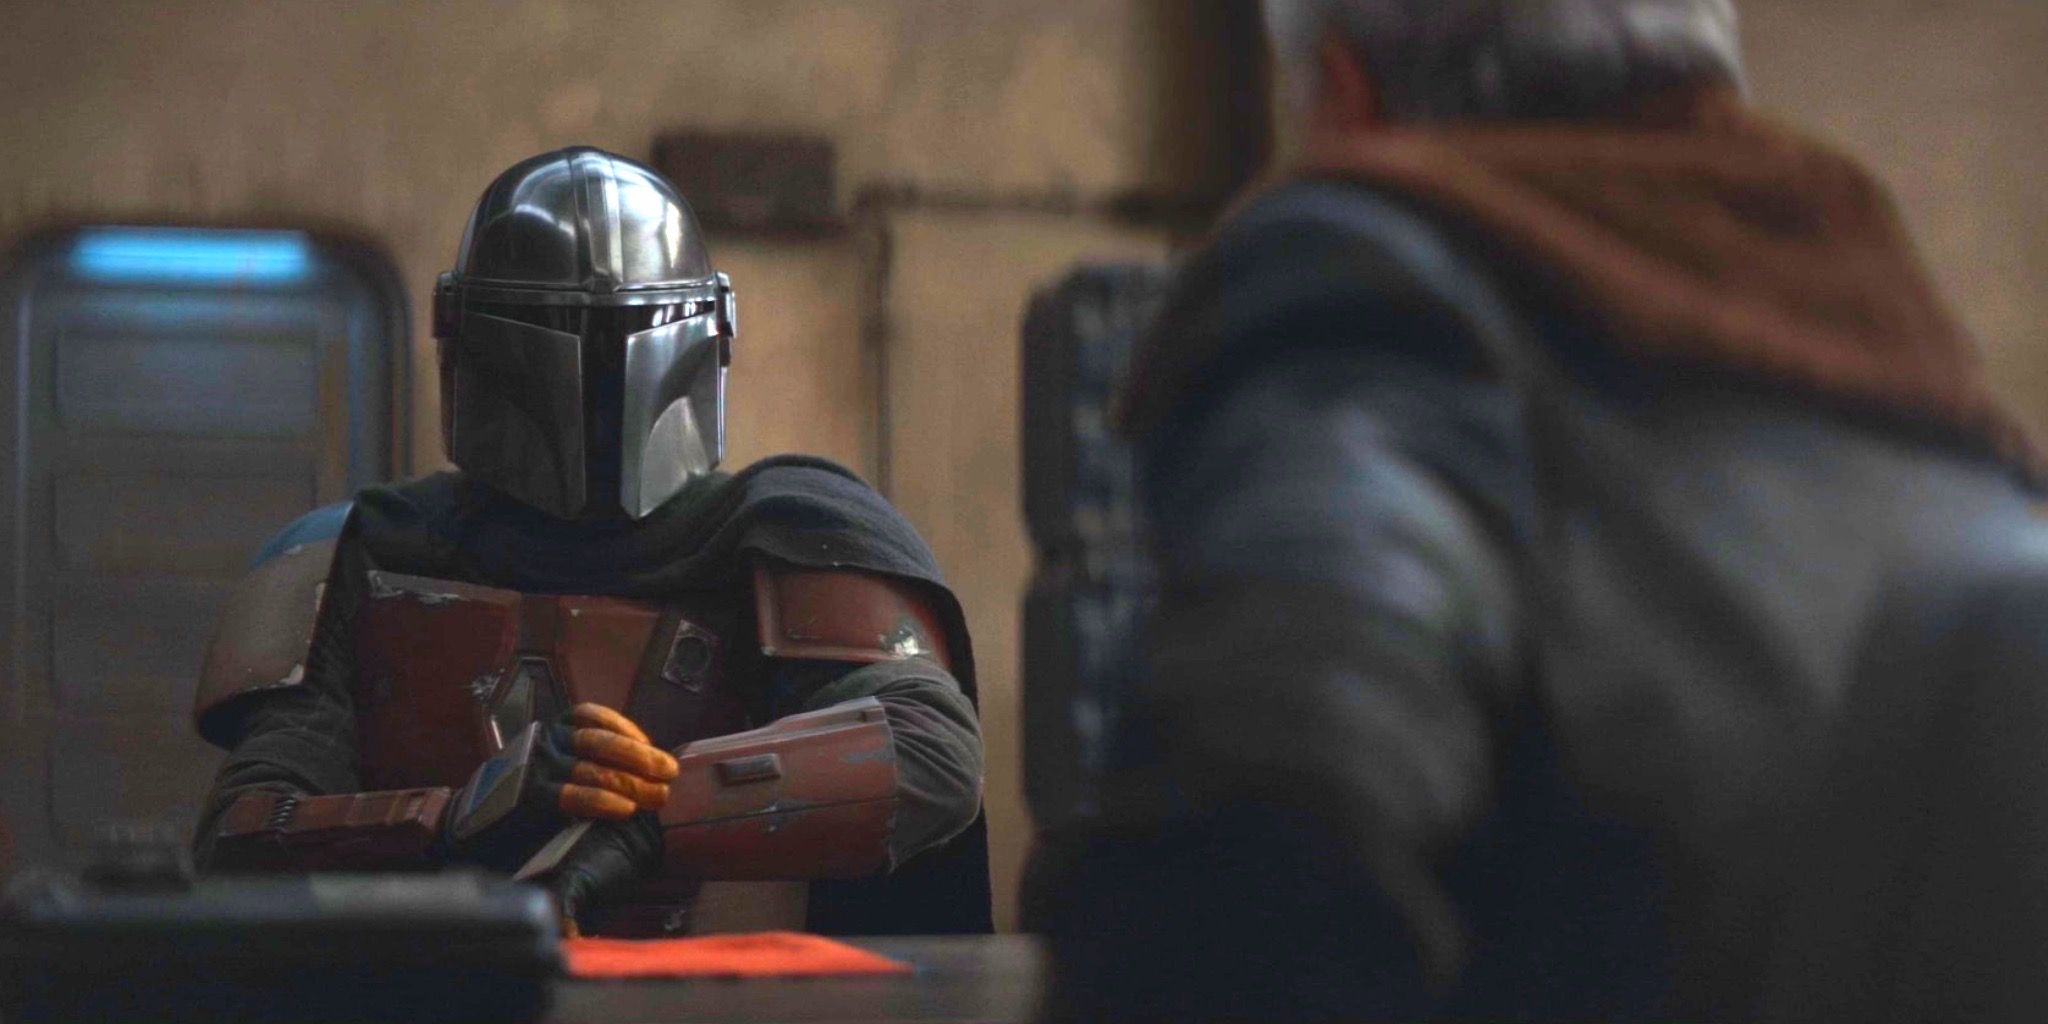 Din Djarin asks the Client about Grogu's chain code in The Mandalorian season 1 episode 1